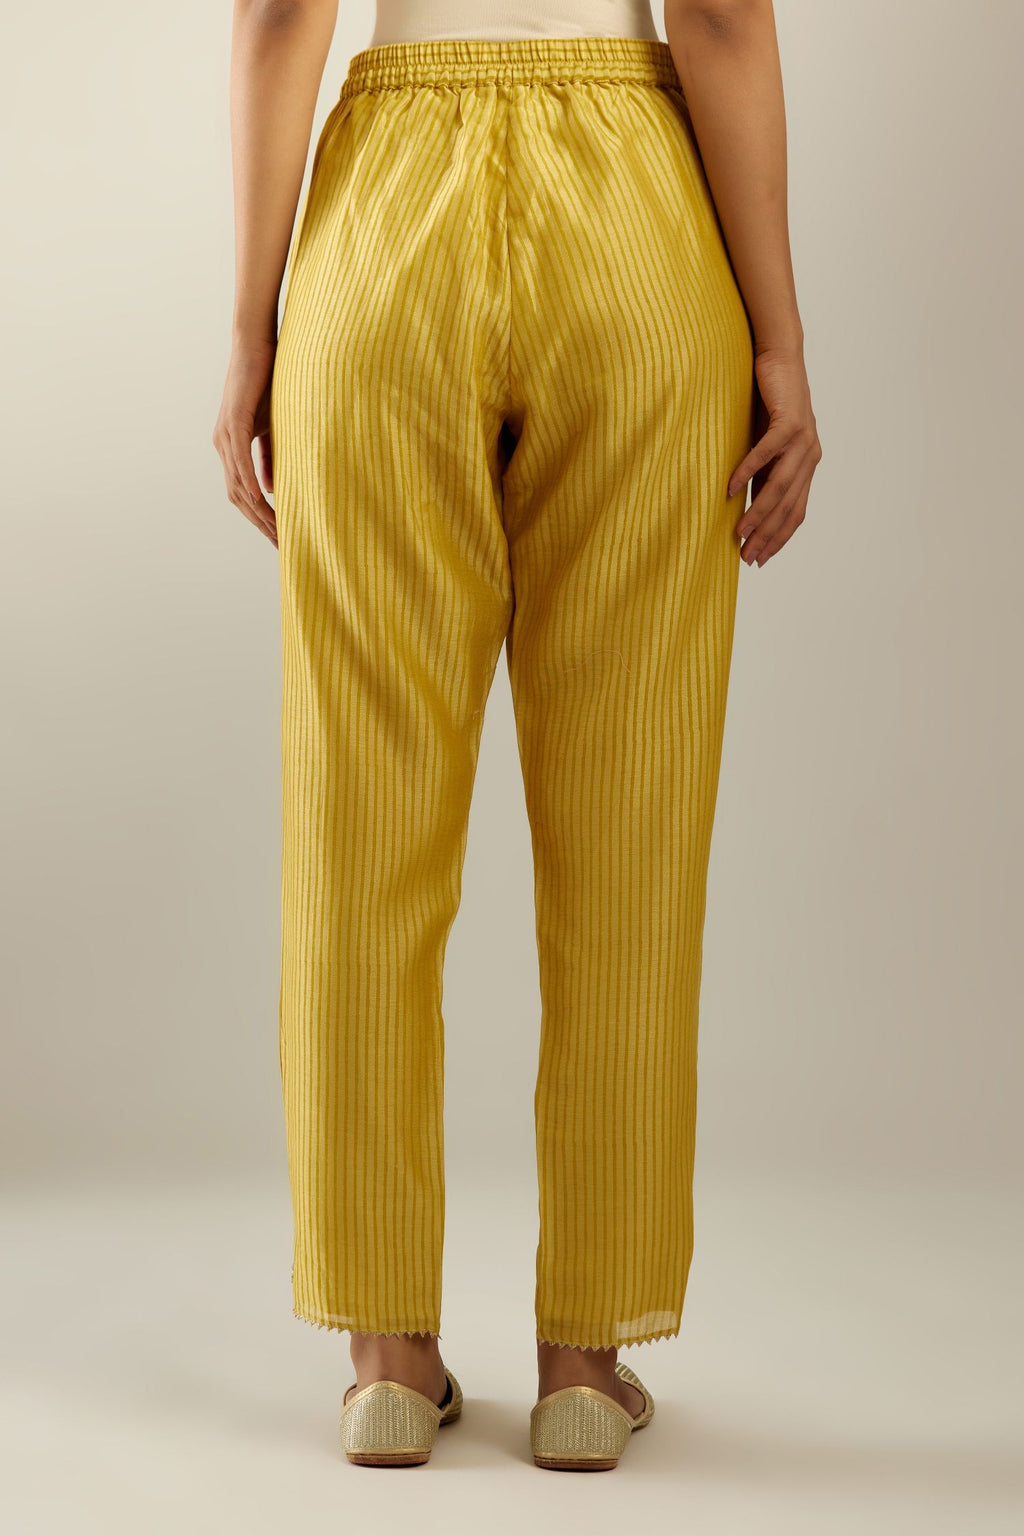 Yellow striped hand block printed silk chanderi pants, highlighted with gota and zari embroidery at hem.